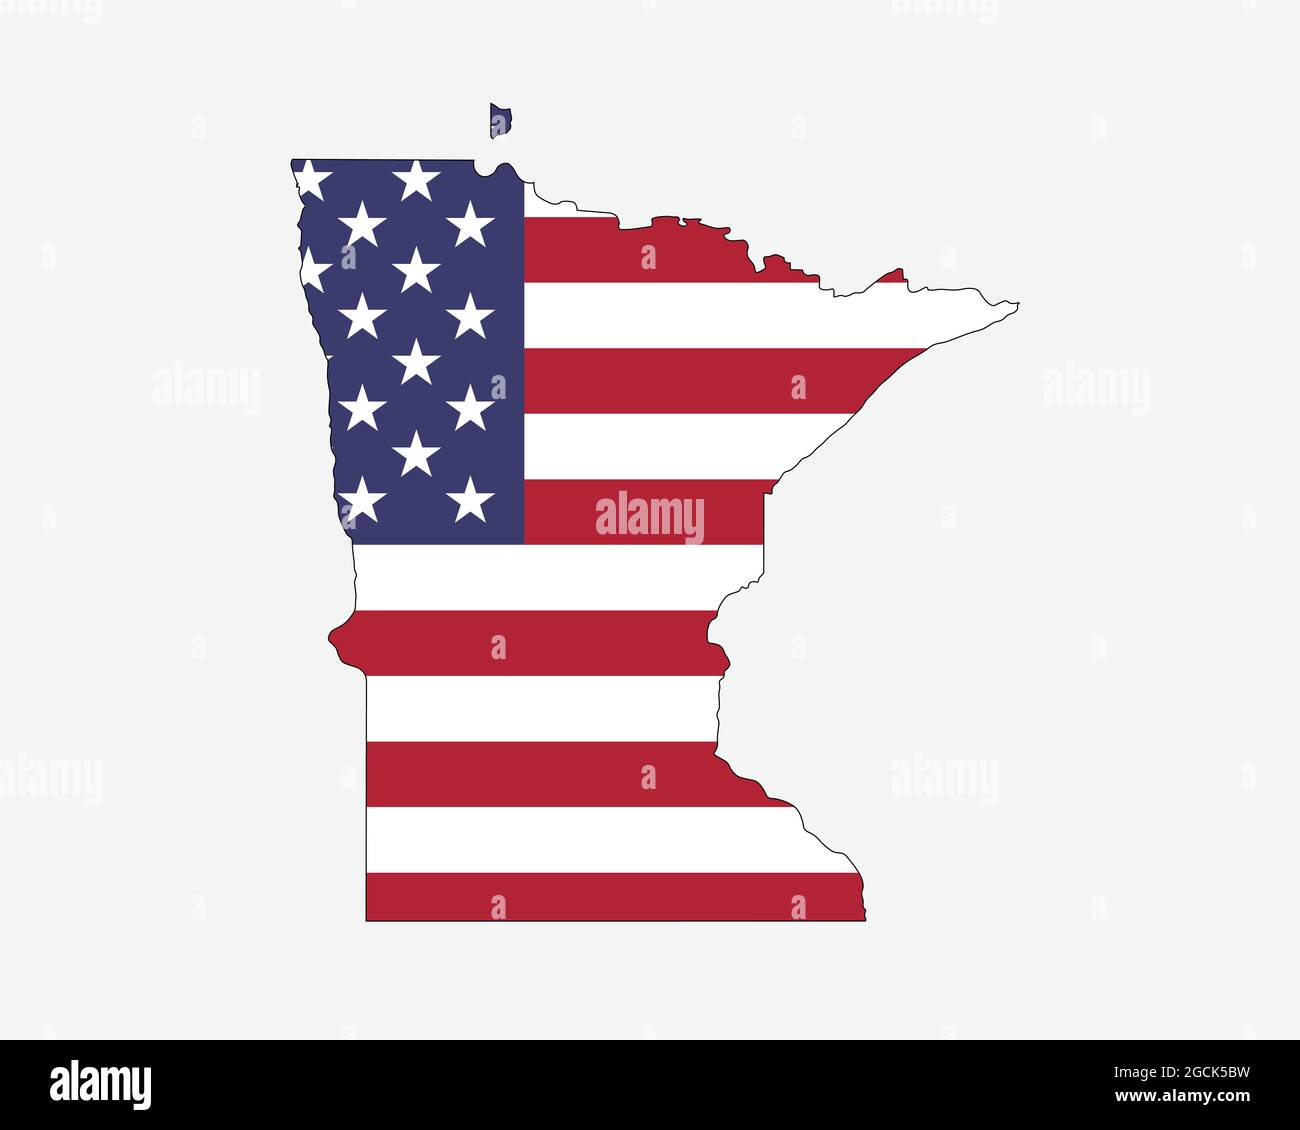 Minnesota Map on American Flag. MN, USA State Map on US Flag. EPS Vector Graphic Clipart Icon Stock Vector